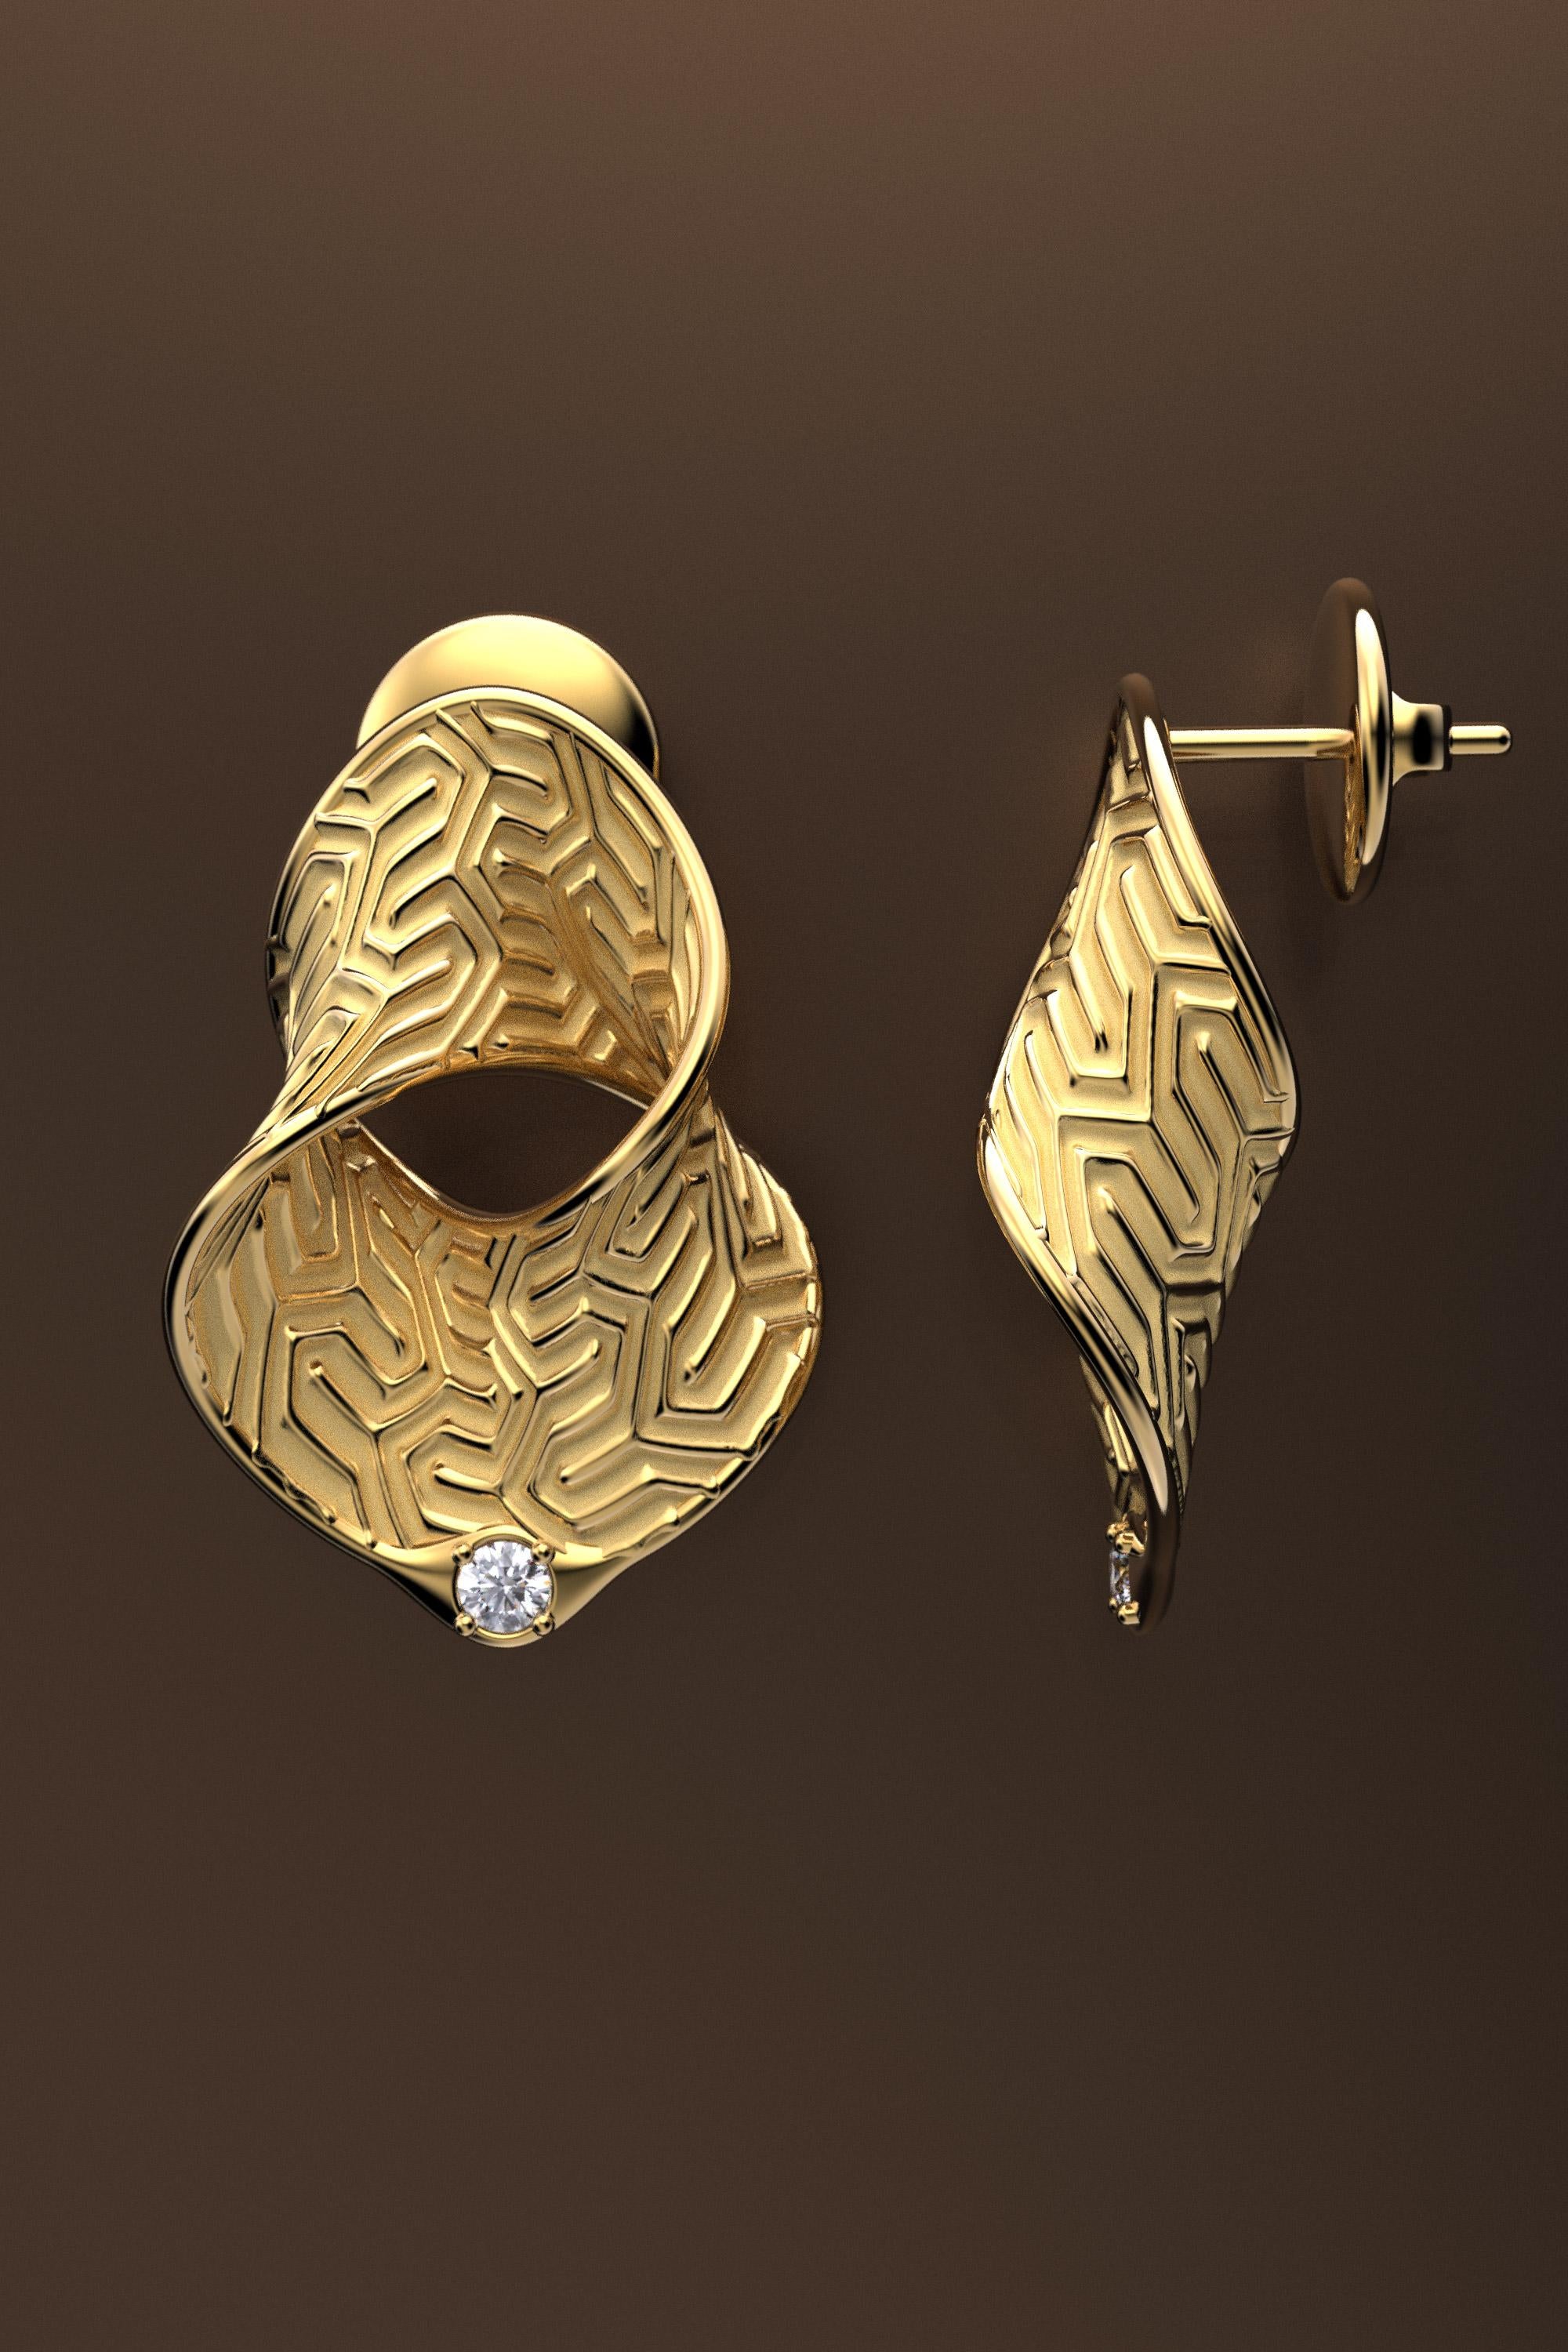 Contemporary 18k Gold Diamond Earrings Made in Italy by Oltremare Gioielli, Italian Jewelry For Sale